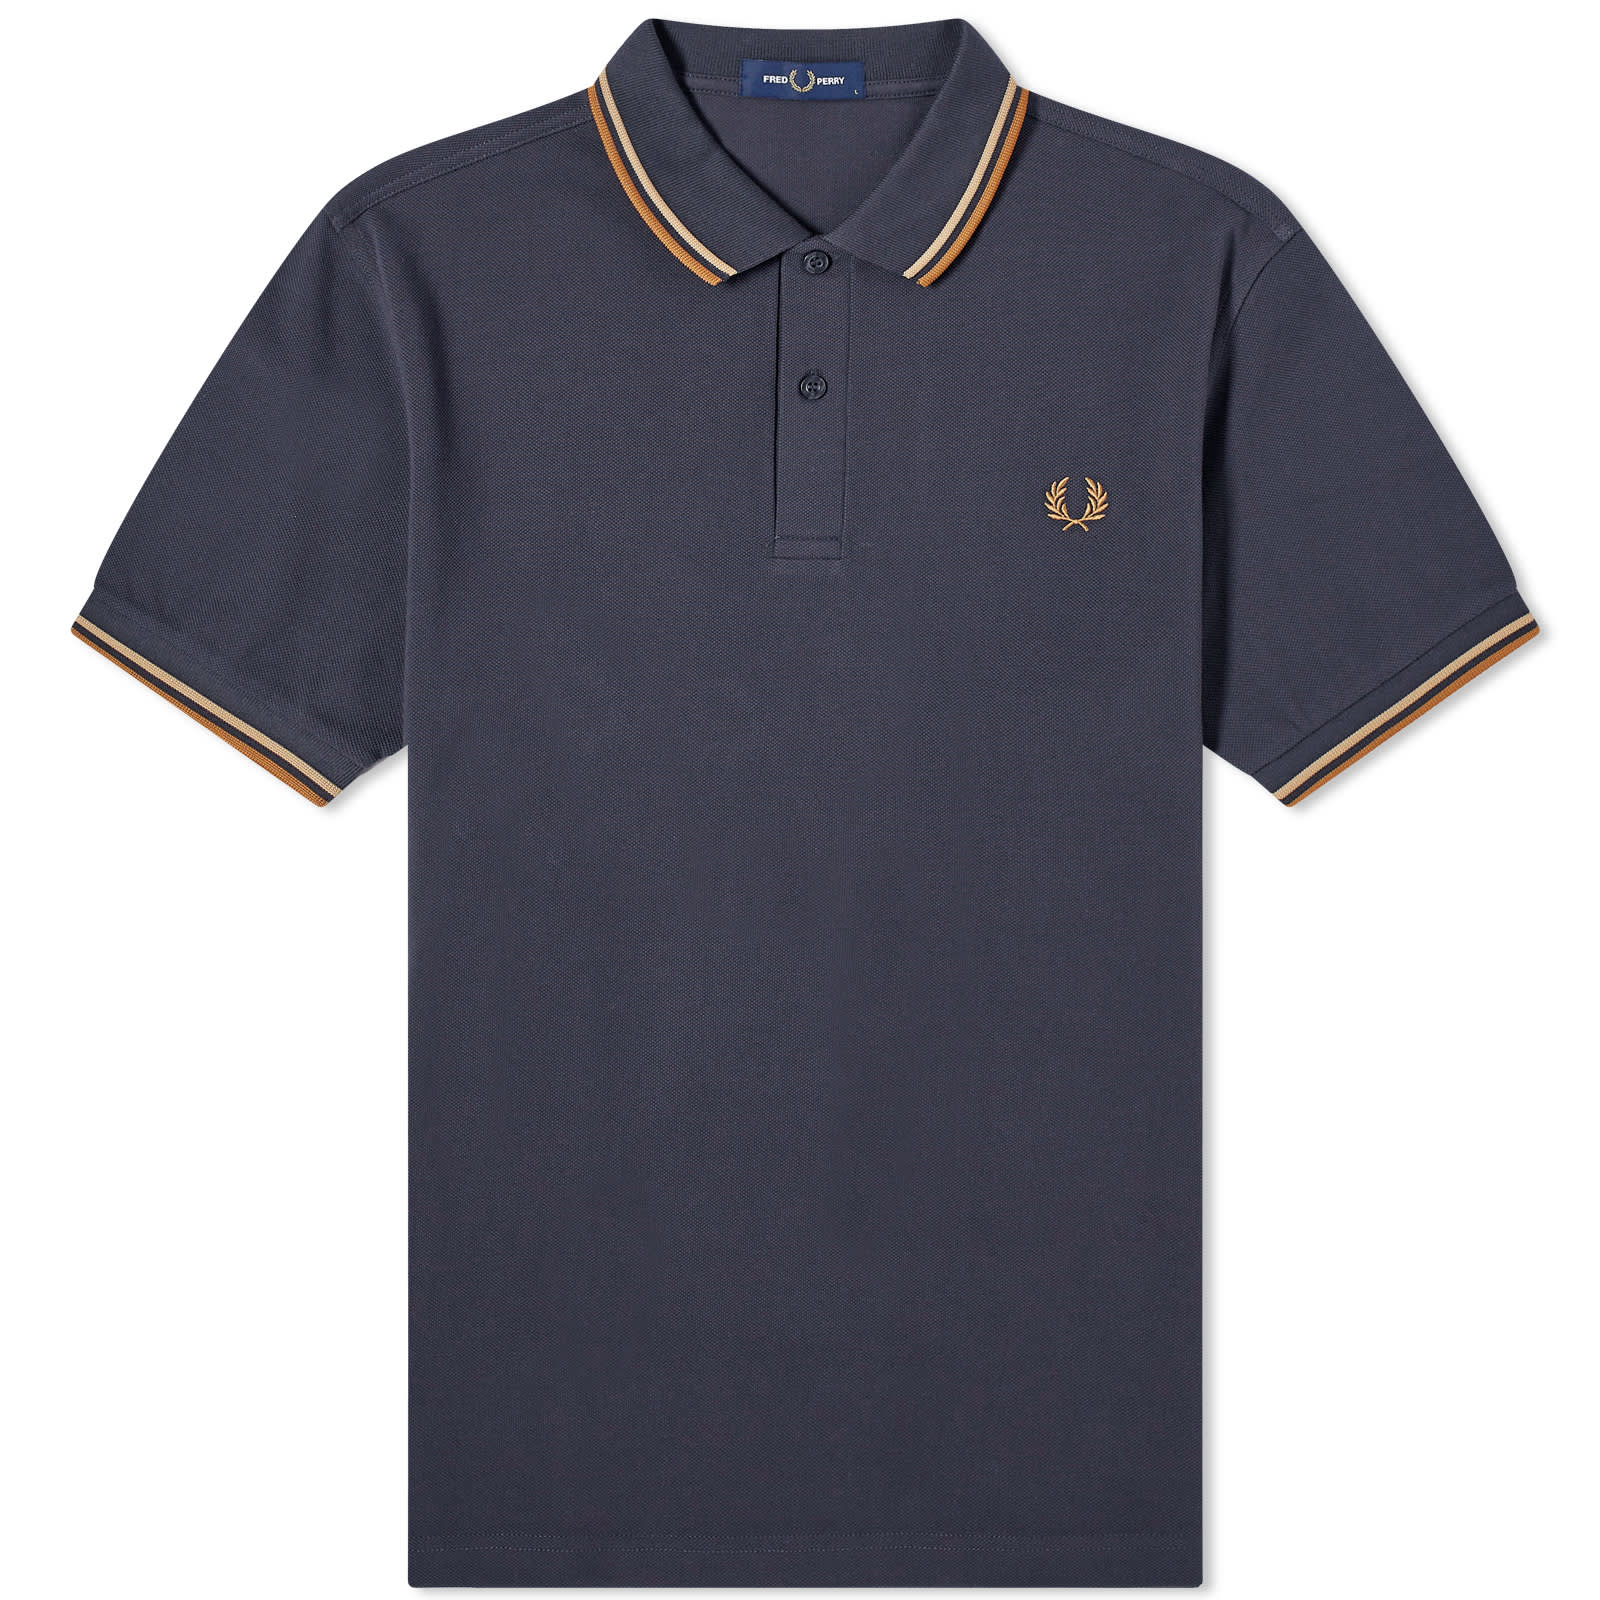 Поло Fred Perry Twin Tipped, цвет Grey, Stone & Caramel рубашка fred perry long sleeve twin tipped shirt цвет burnt tobacco